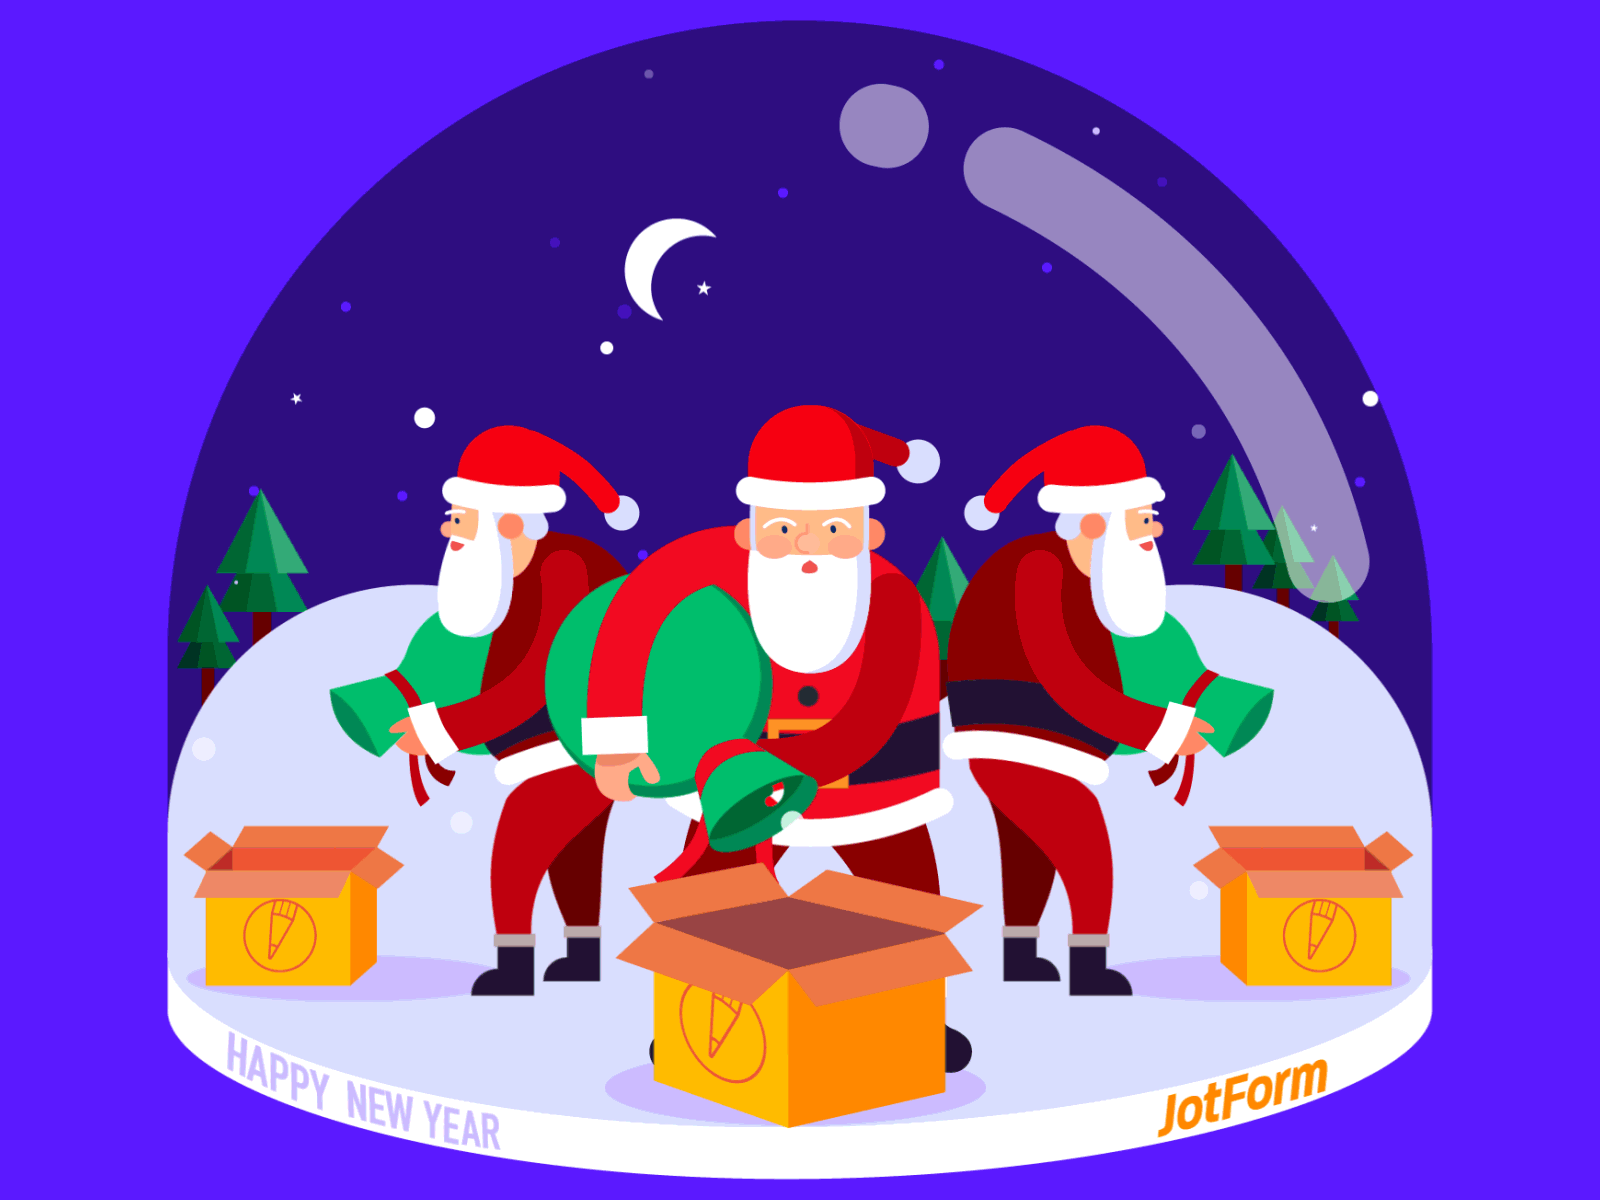 Santa's are preparing to deliver presents candy celebrating new year christmas ornaments gif animation gift box happy new year happy santas jotform loop animation ornaments santa snow day snow globe snow white snowy winter